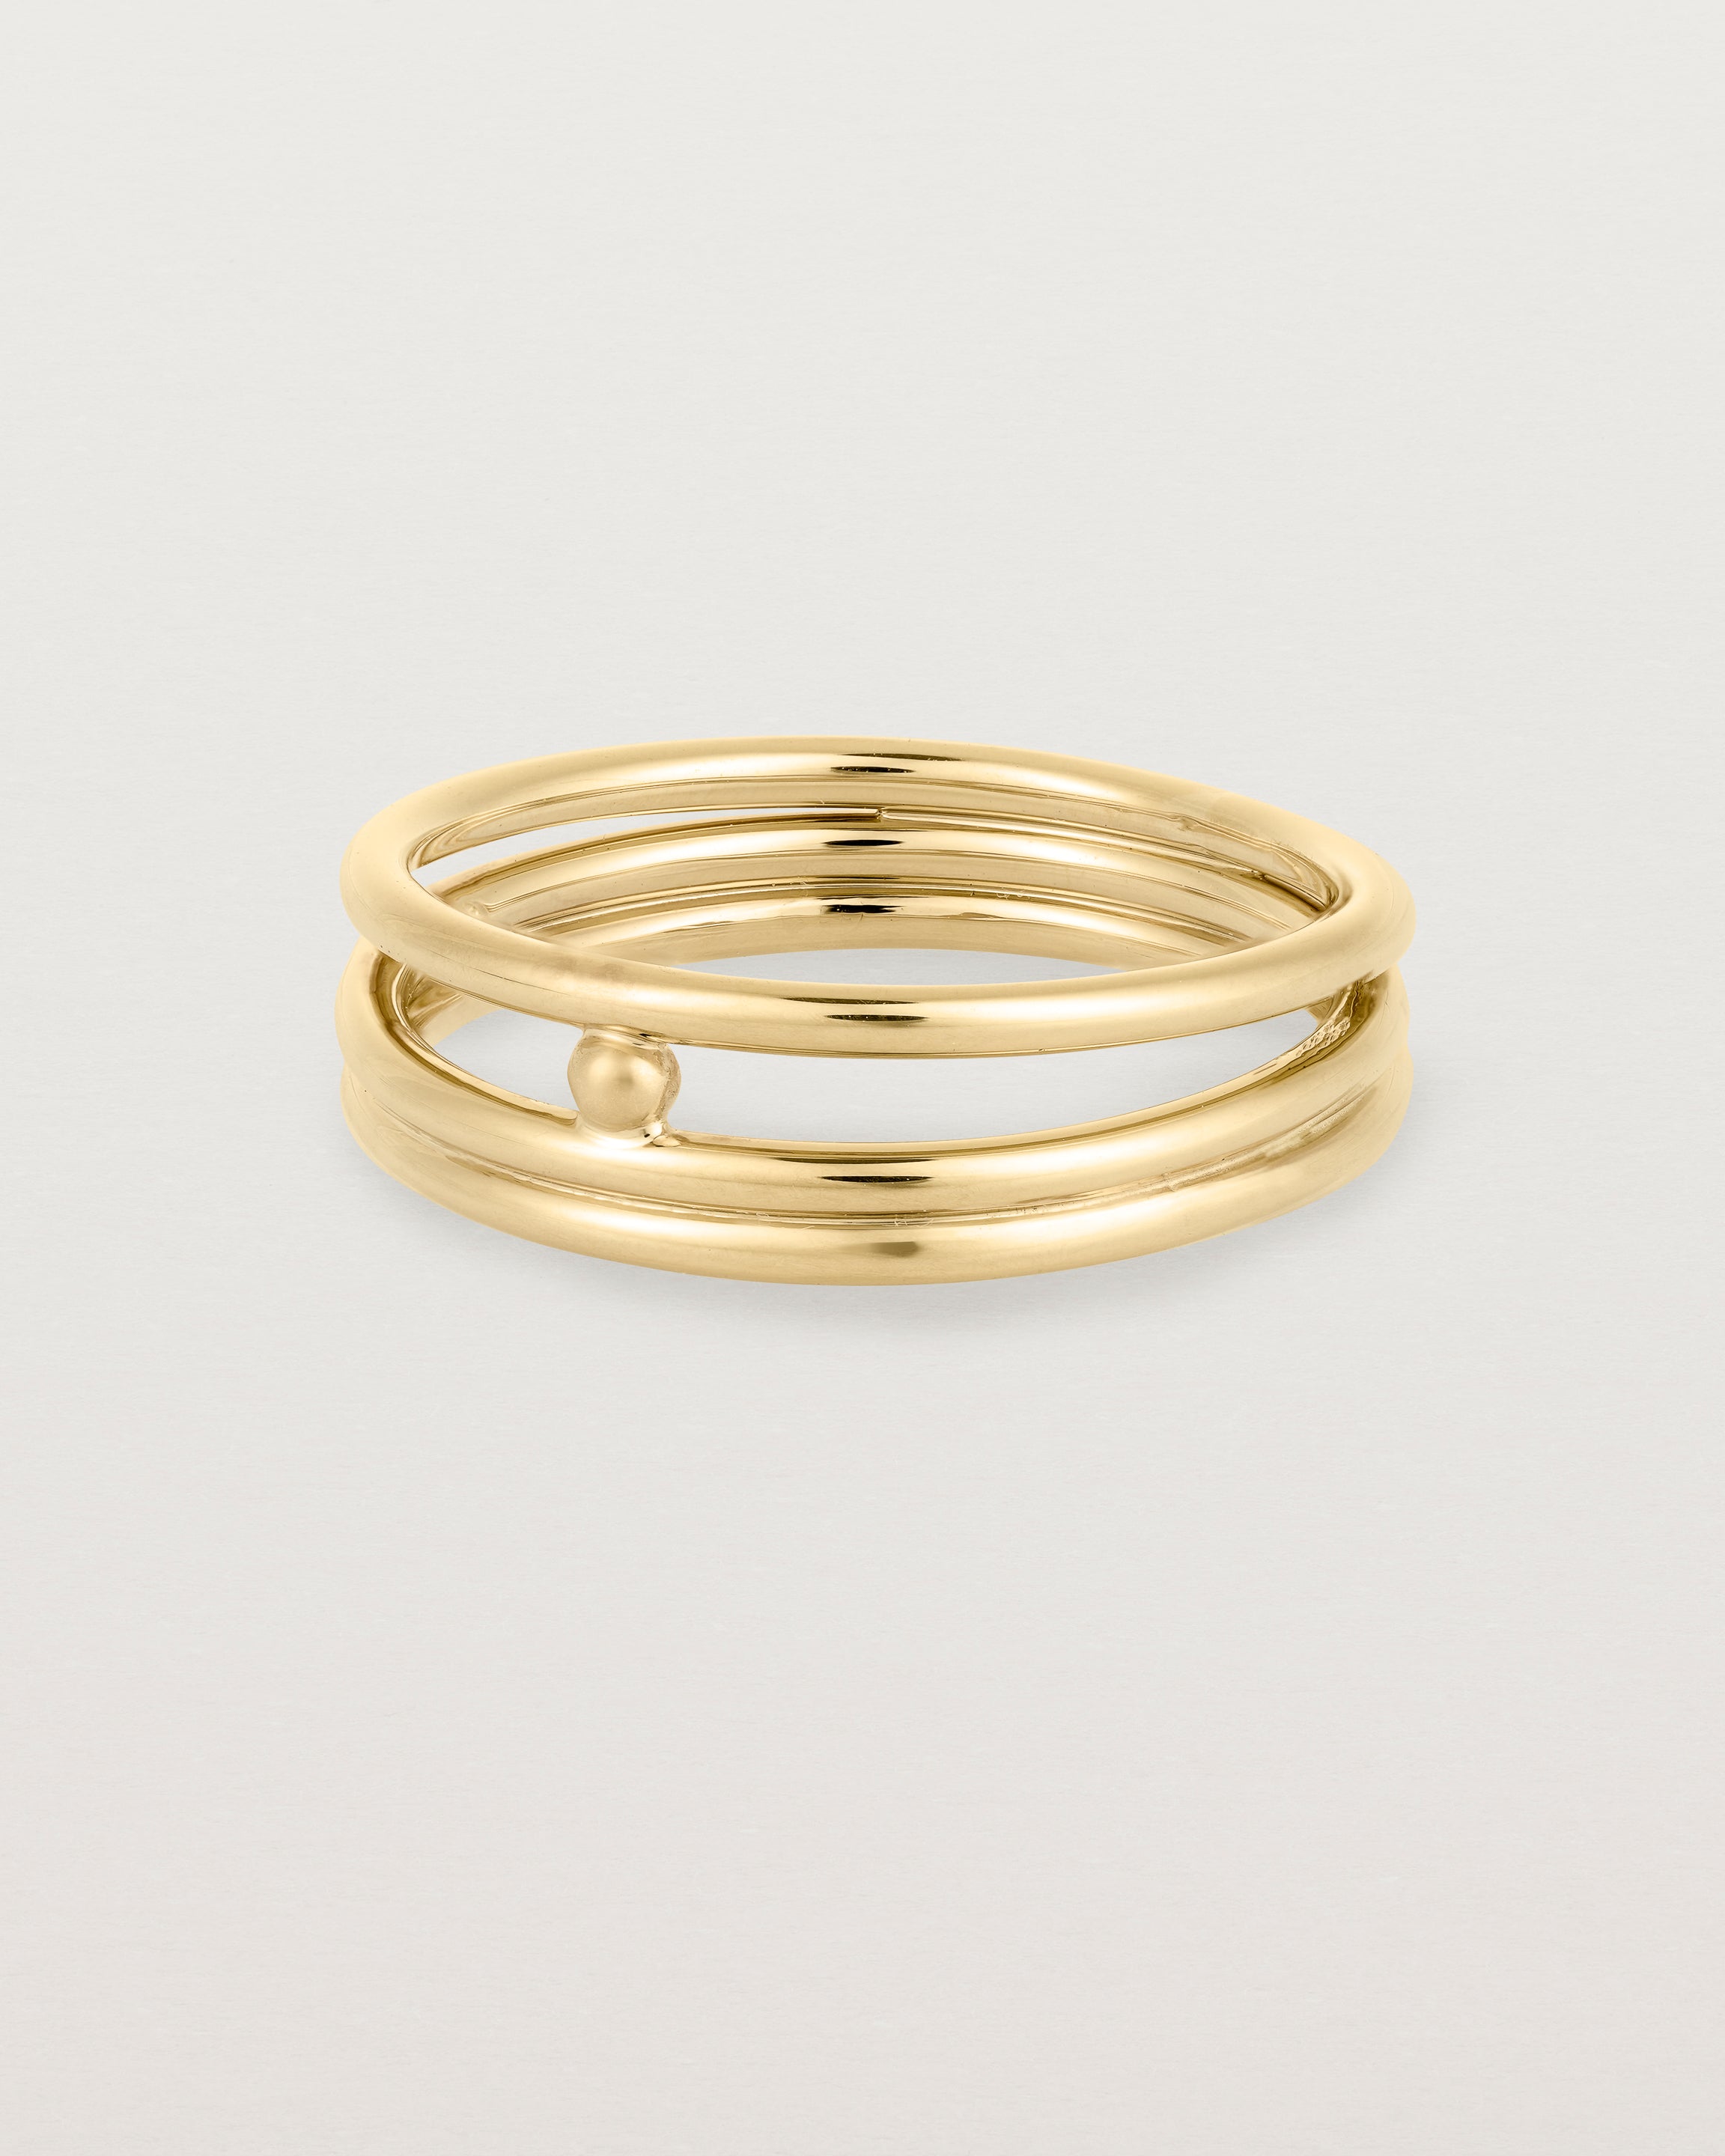 layered yellow gold ring featuring a yellow gold ball suspended between two bands